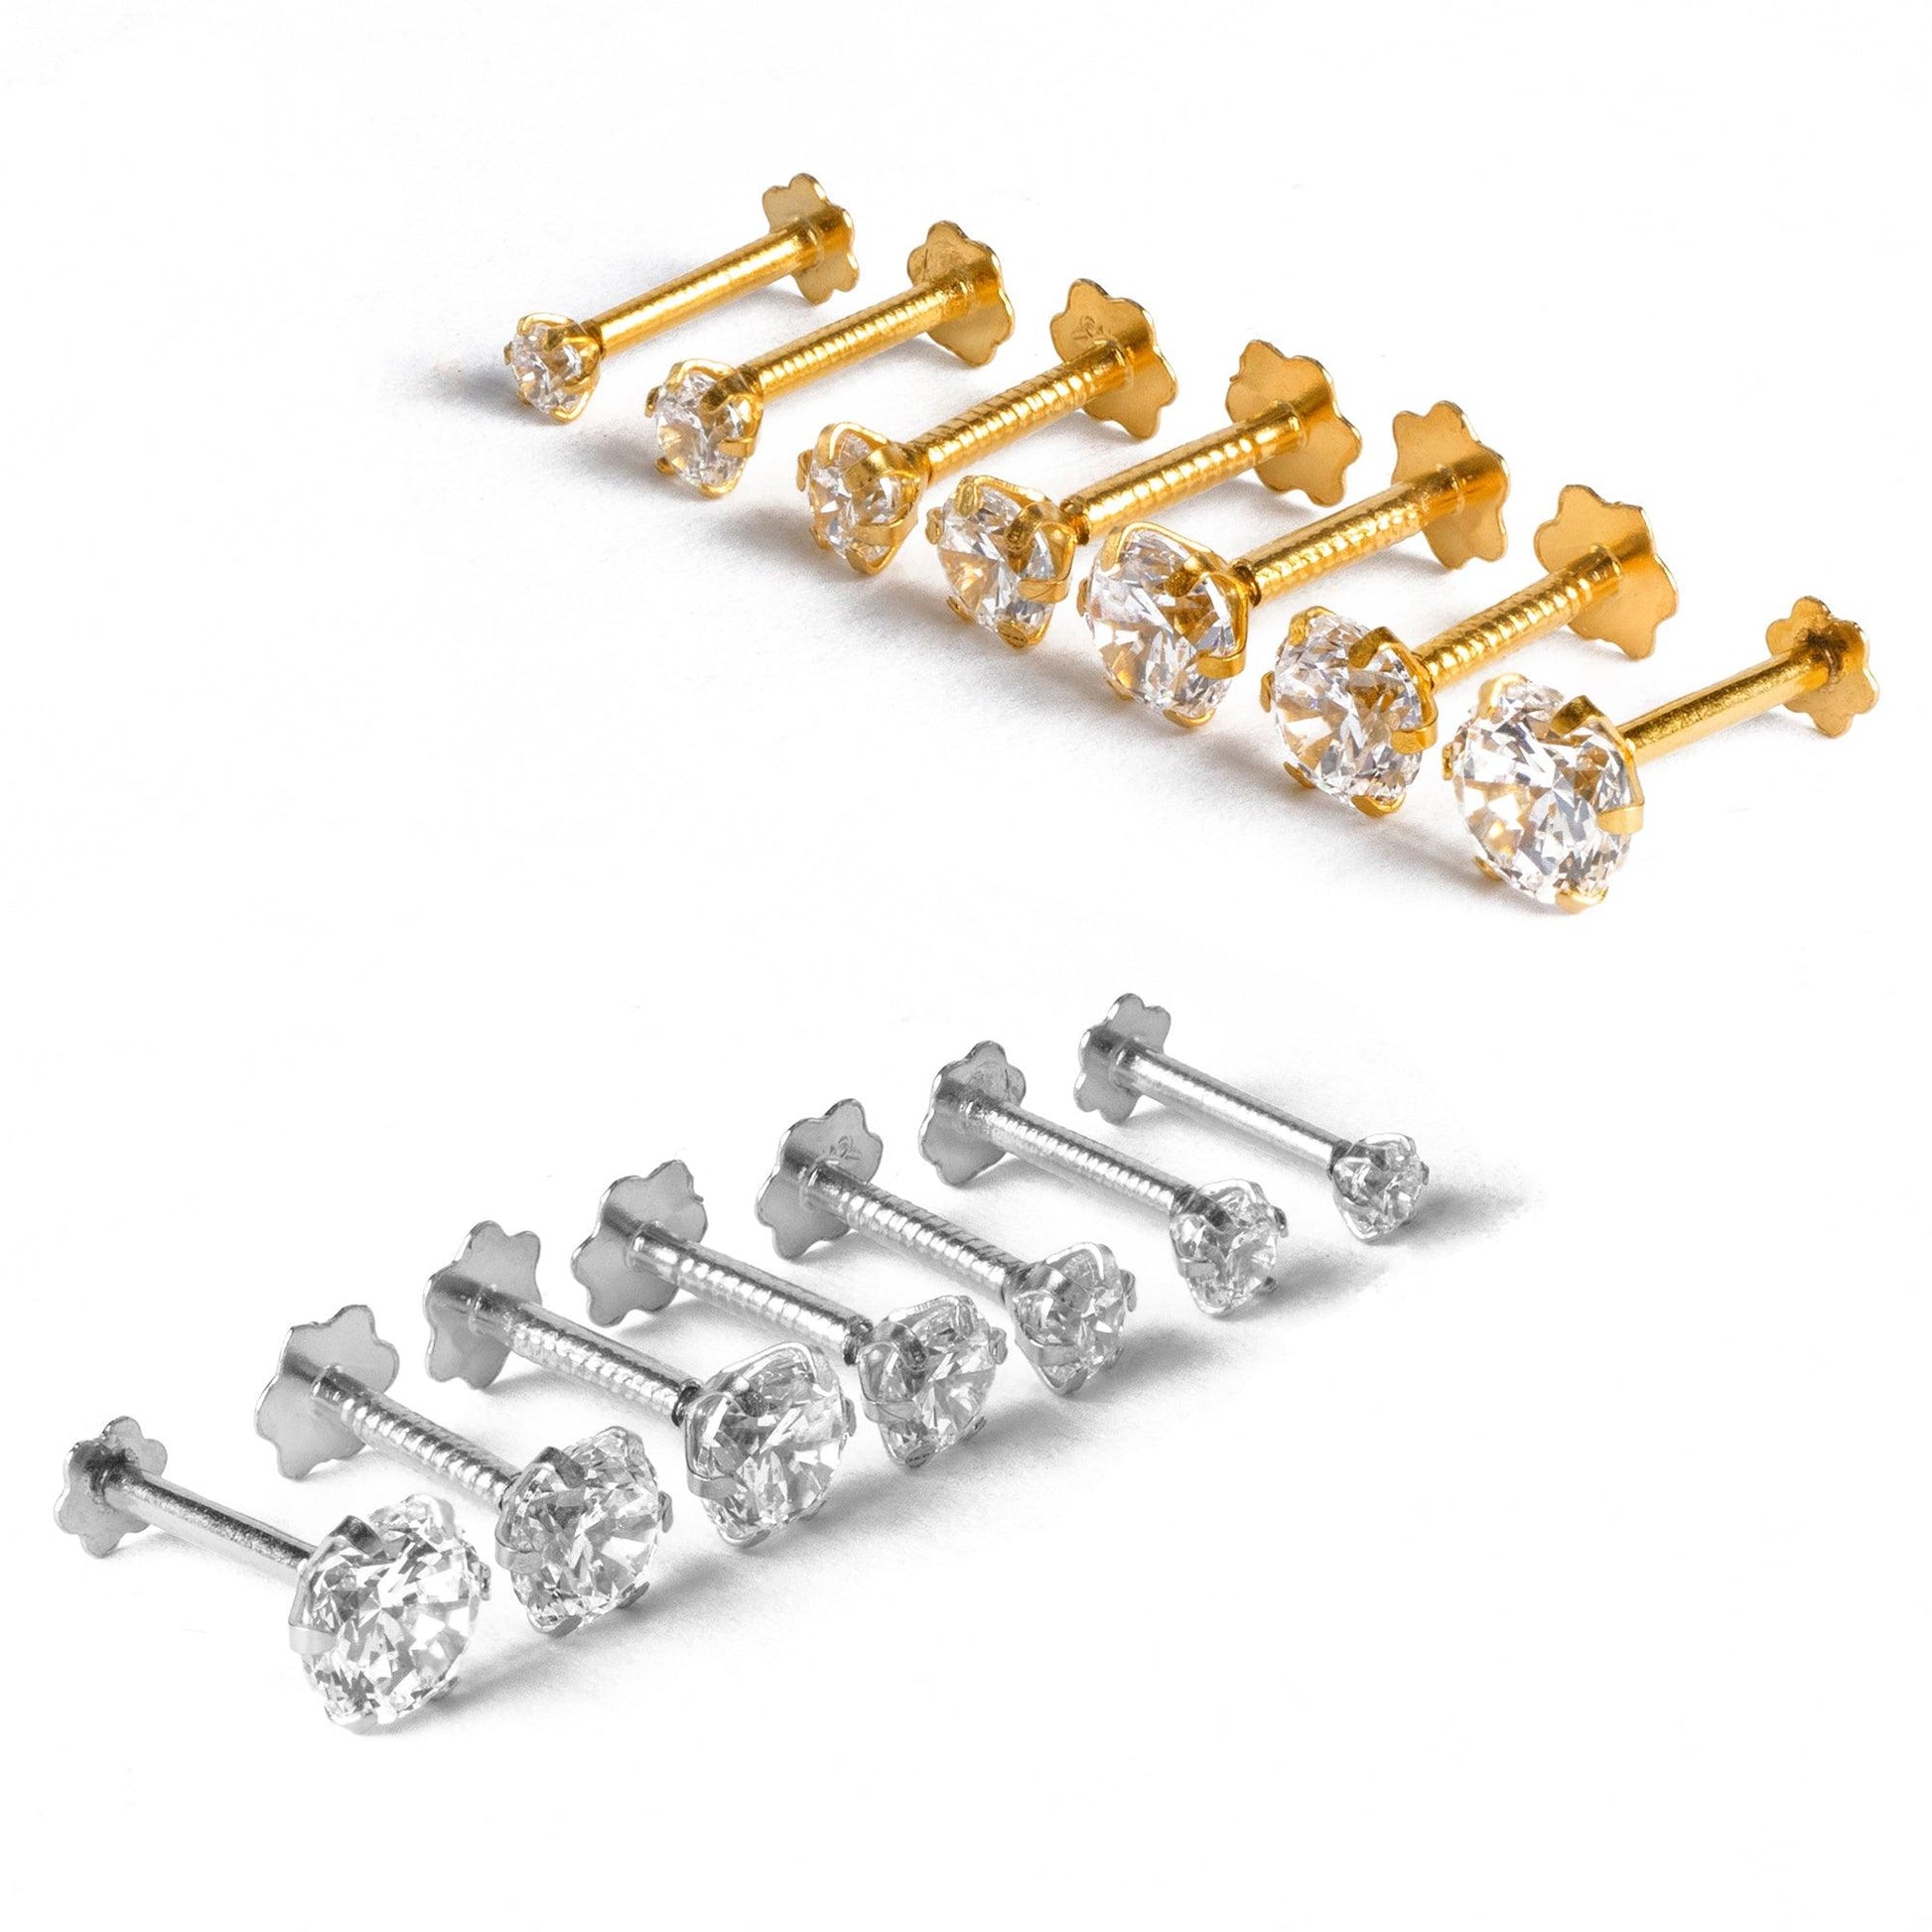 18ct Gold Nose Stud Screw Back with a Cubic Zirconia Stone (2mm - 5mm) - Minar Jewellers